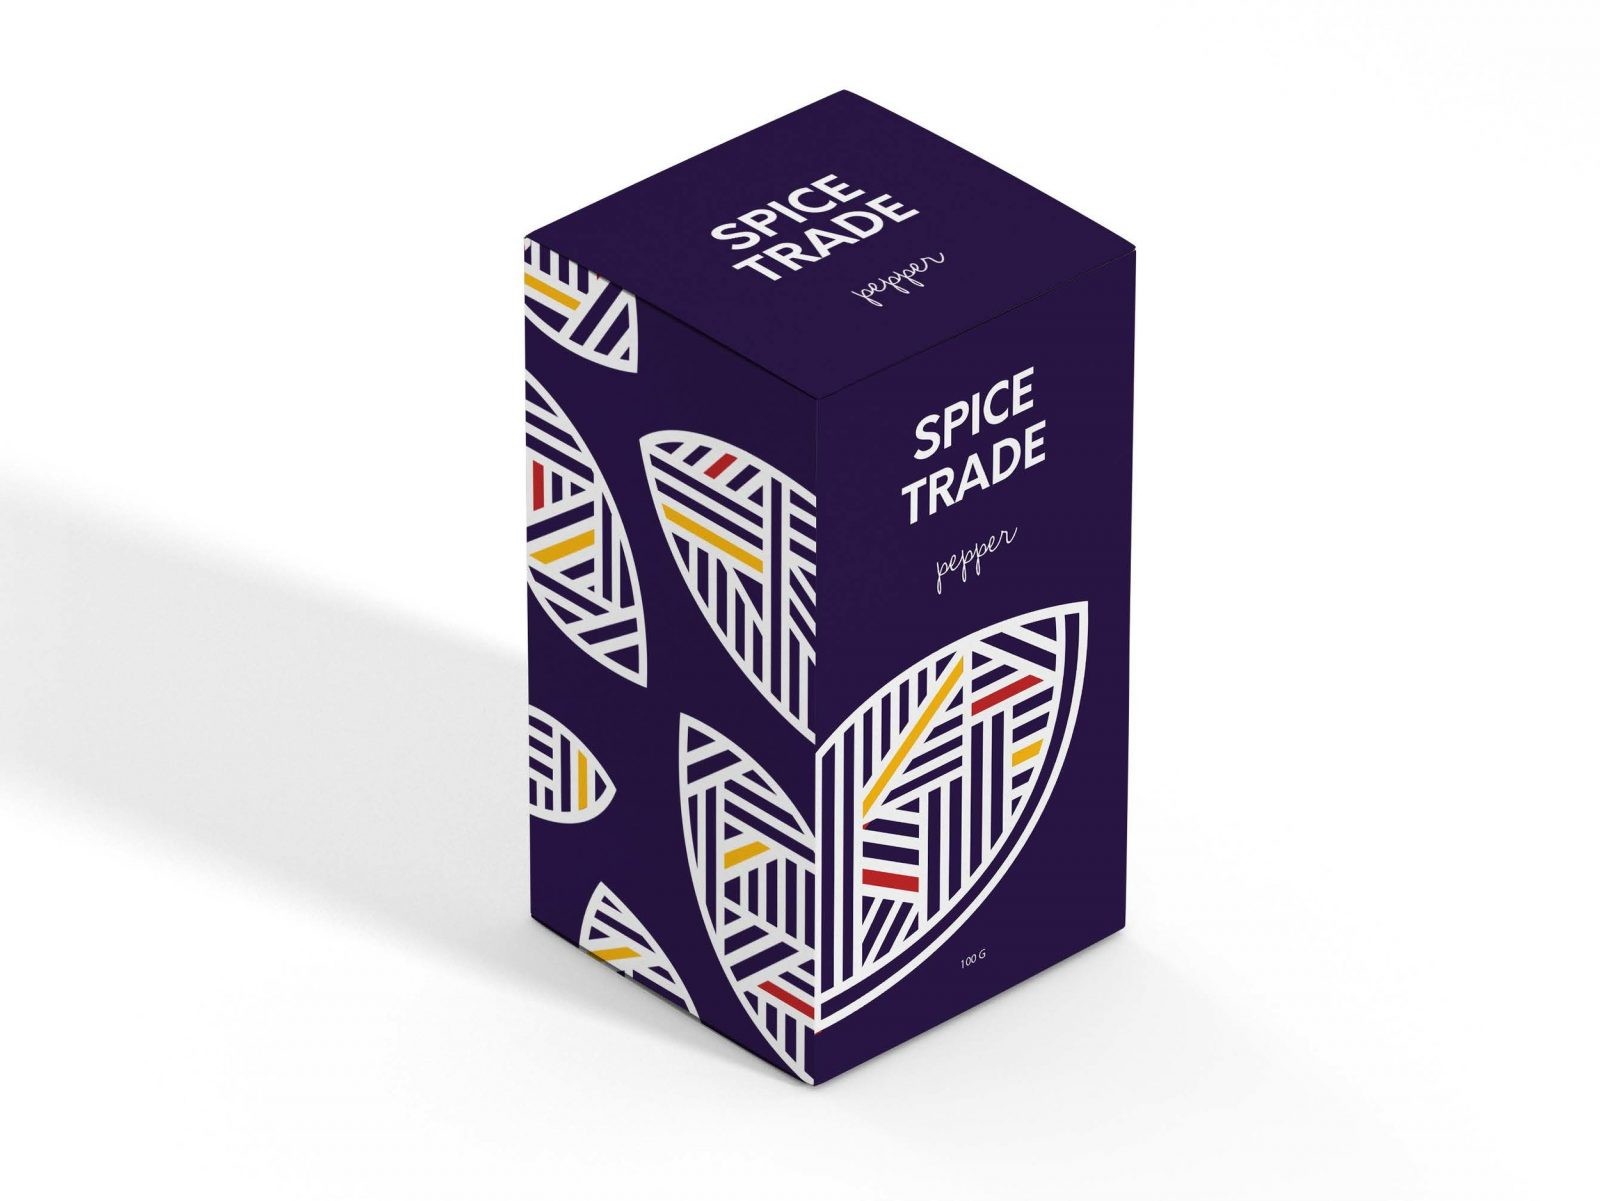 Packaging Design for Indian Spices “Spice Trade”